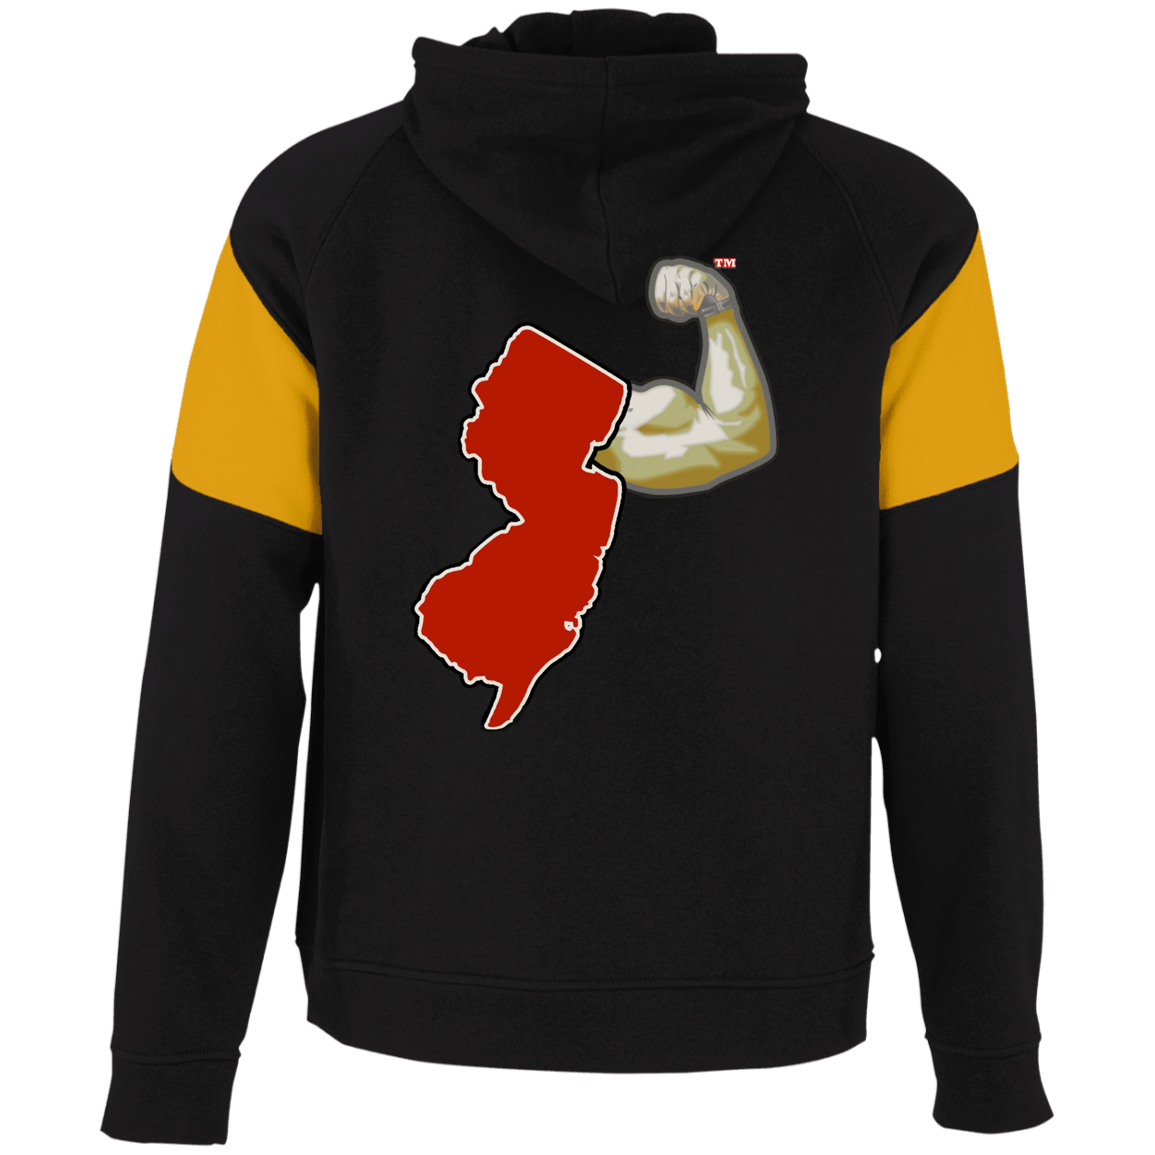 Flex youR Strong - Colorblock Hoodie - Fan Club Series